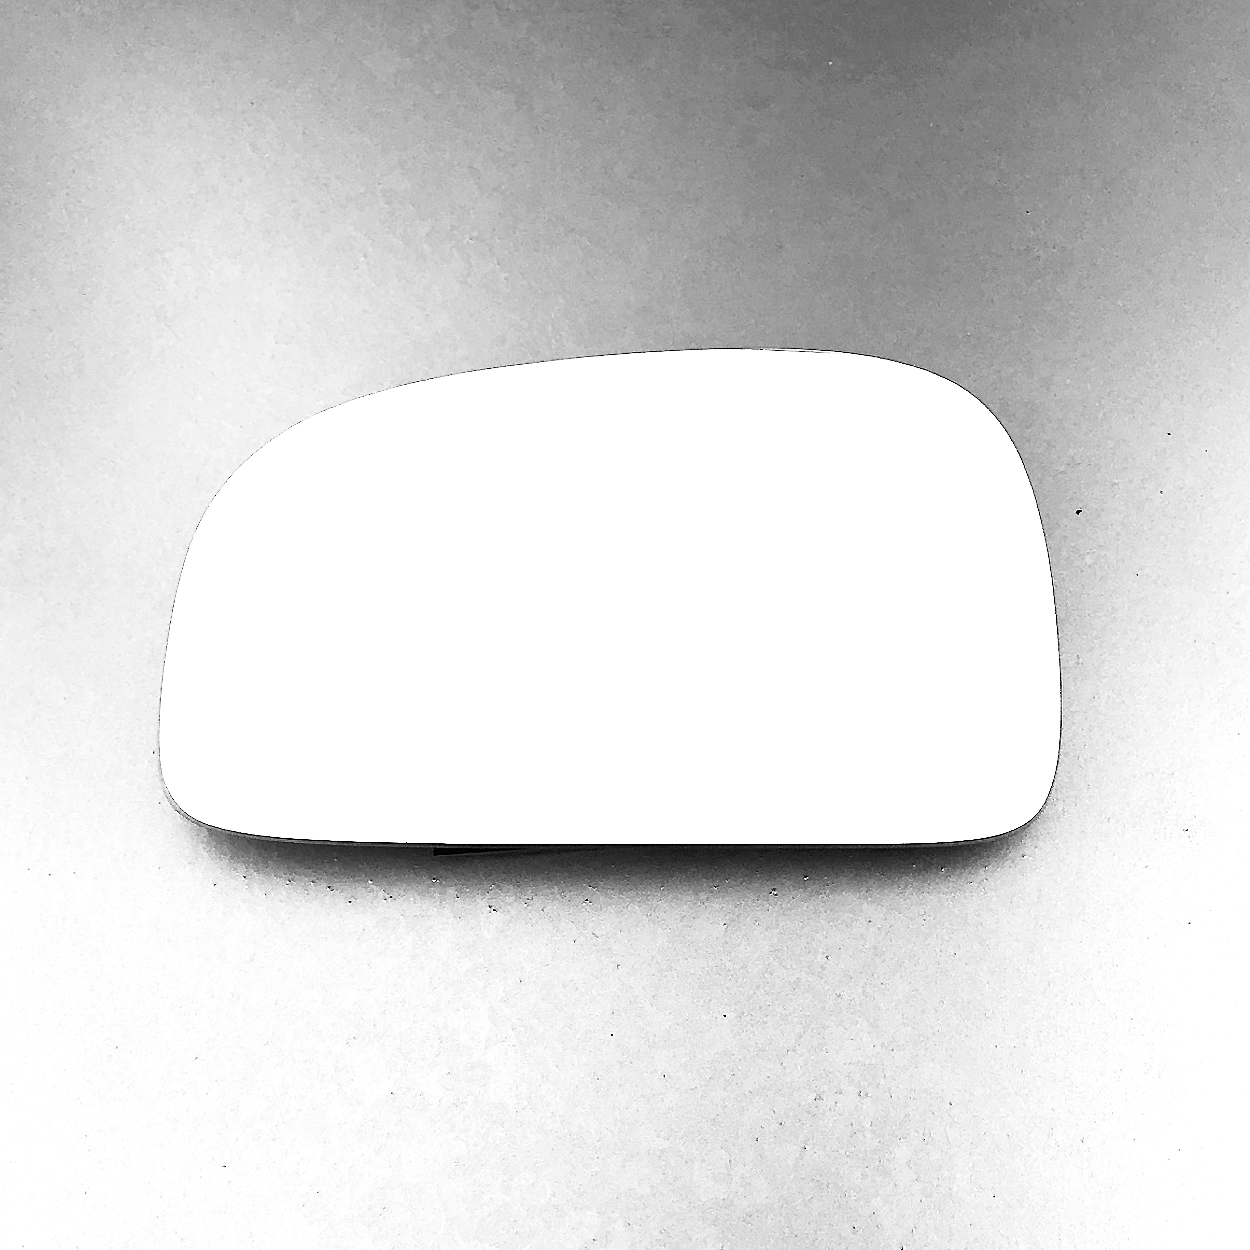 Hyundai Grand Voyager Wing Mirror Glass LEFT HAND ( UK Passenger Side ) 2008 to 2015 – Convex Wing Mirror